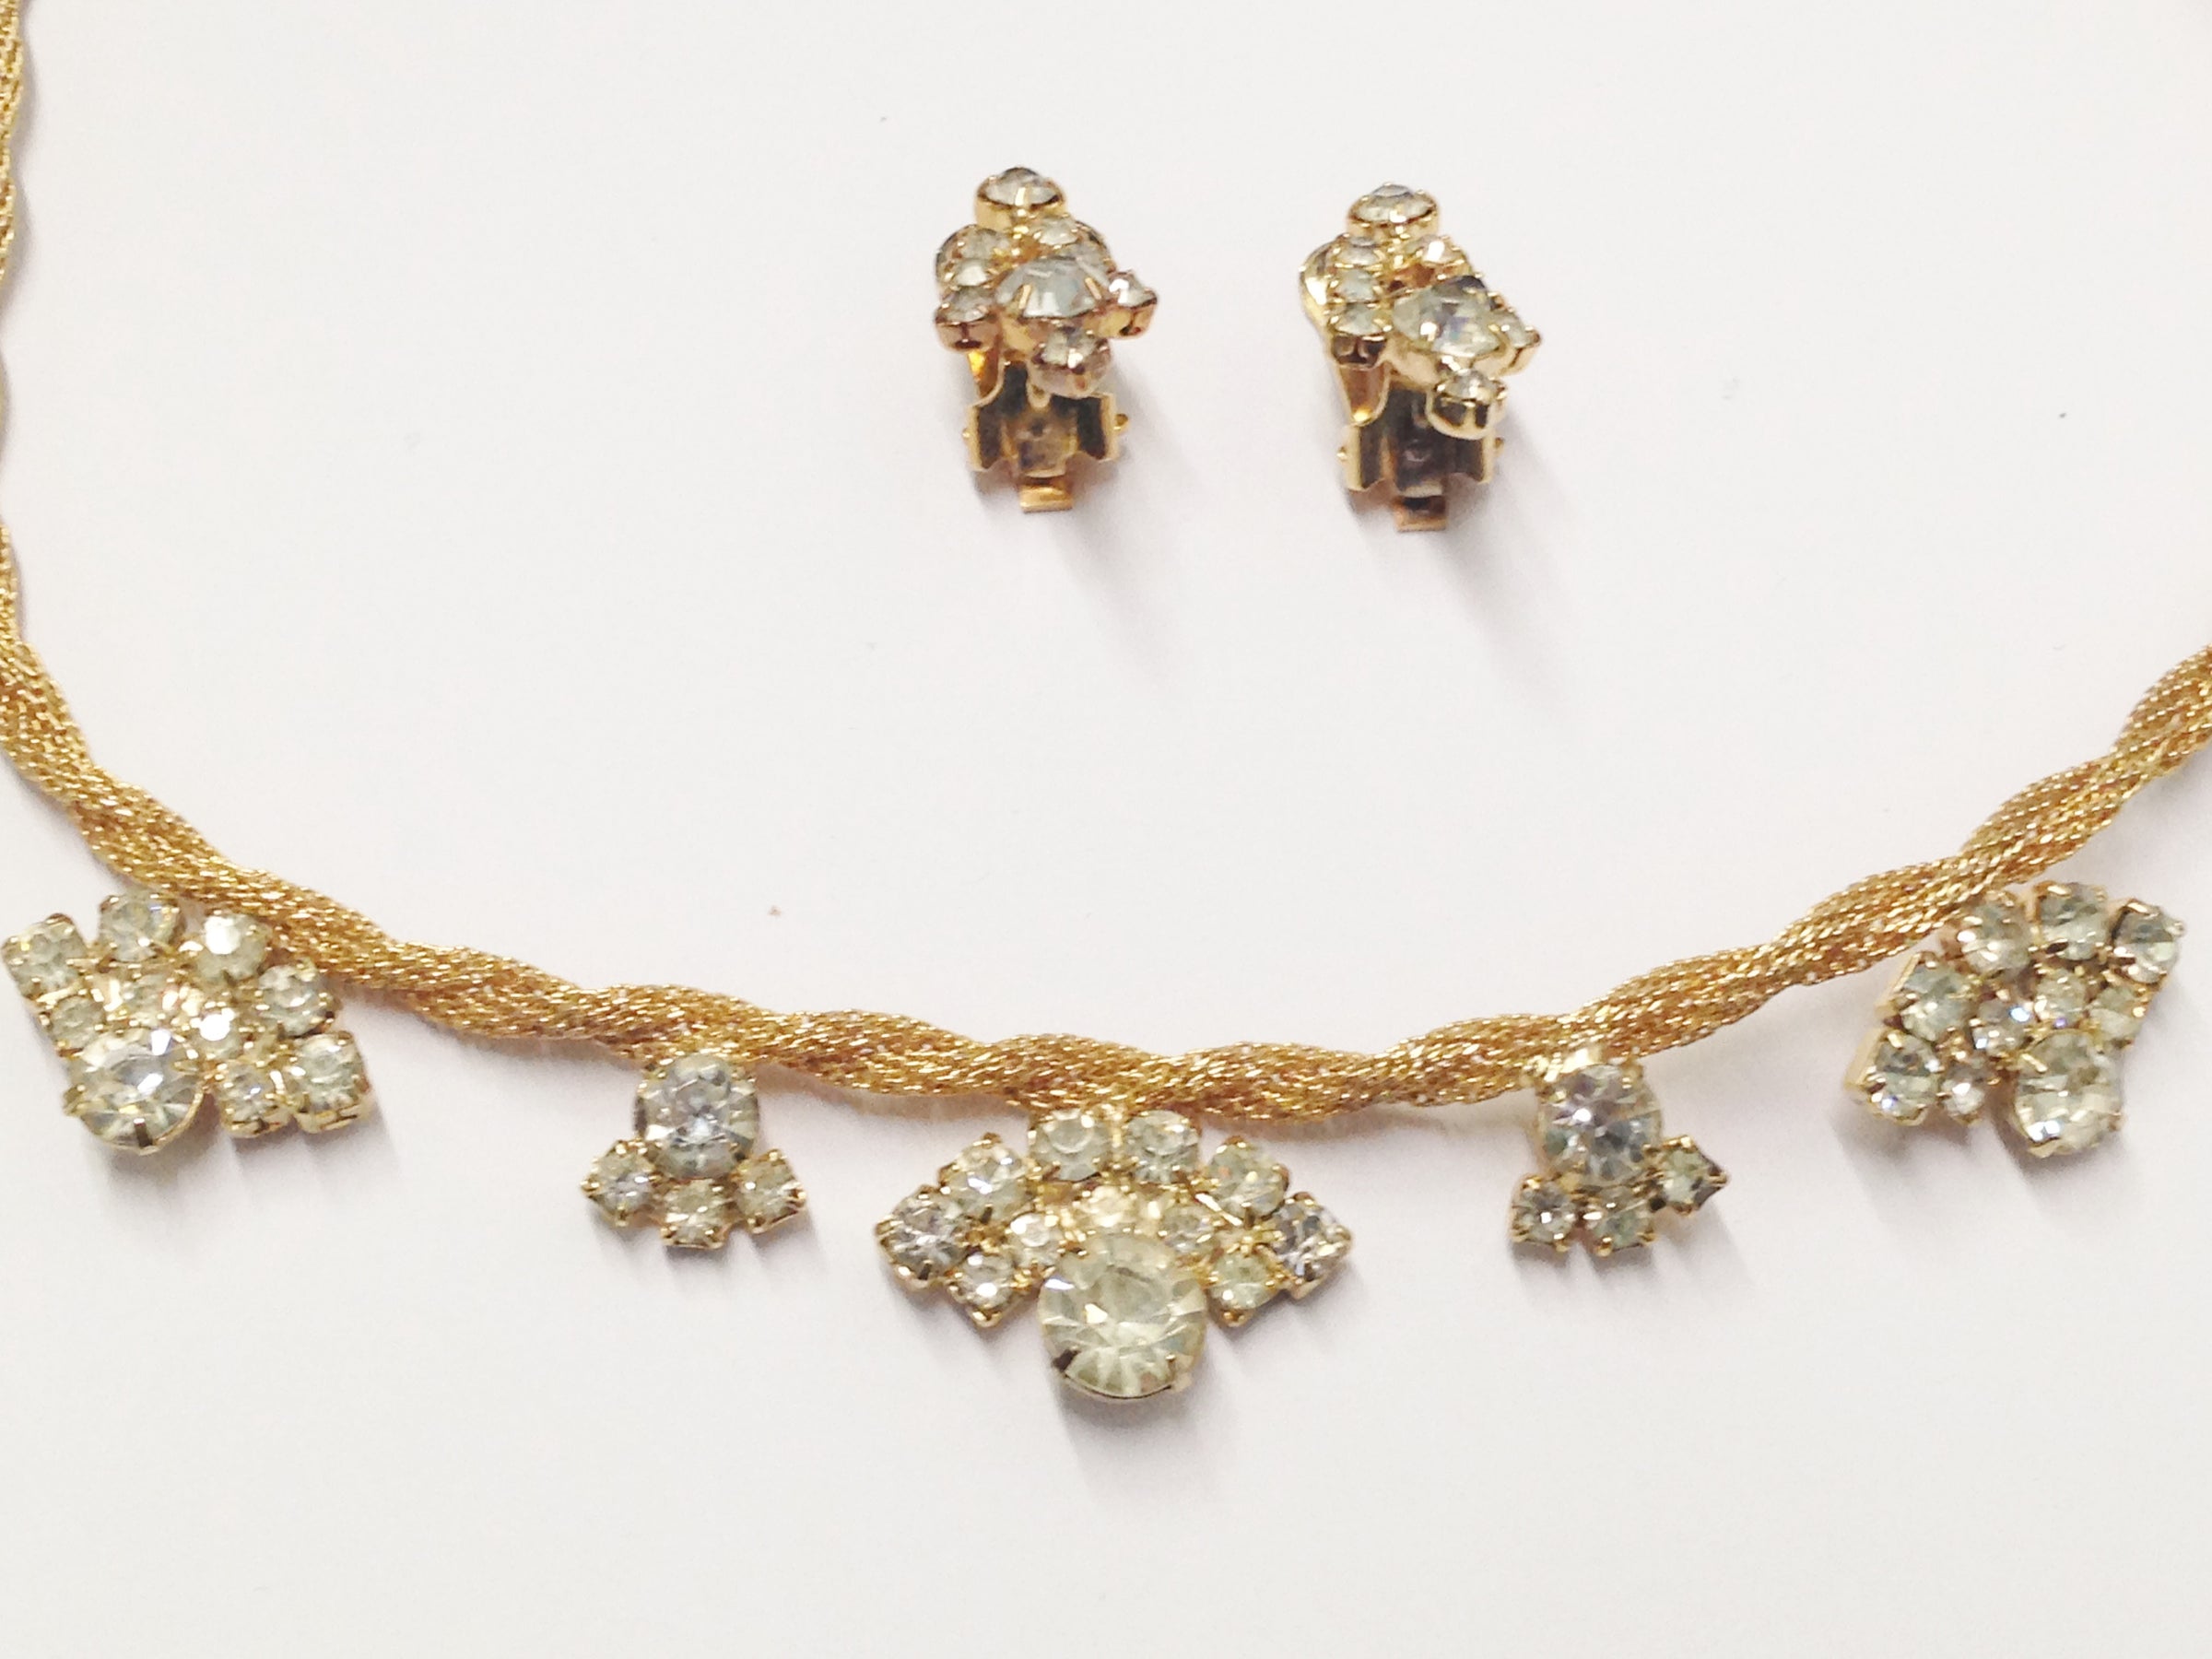 Gold Tone Braided Mesh Rope Necklace W/ Rhinestones & Matching Earrings - Hers and His Treasures